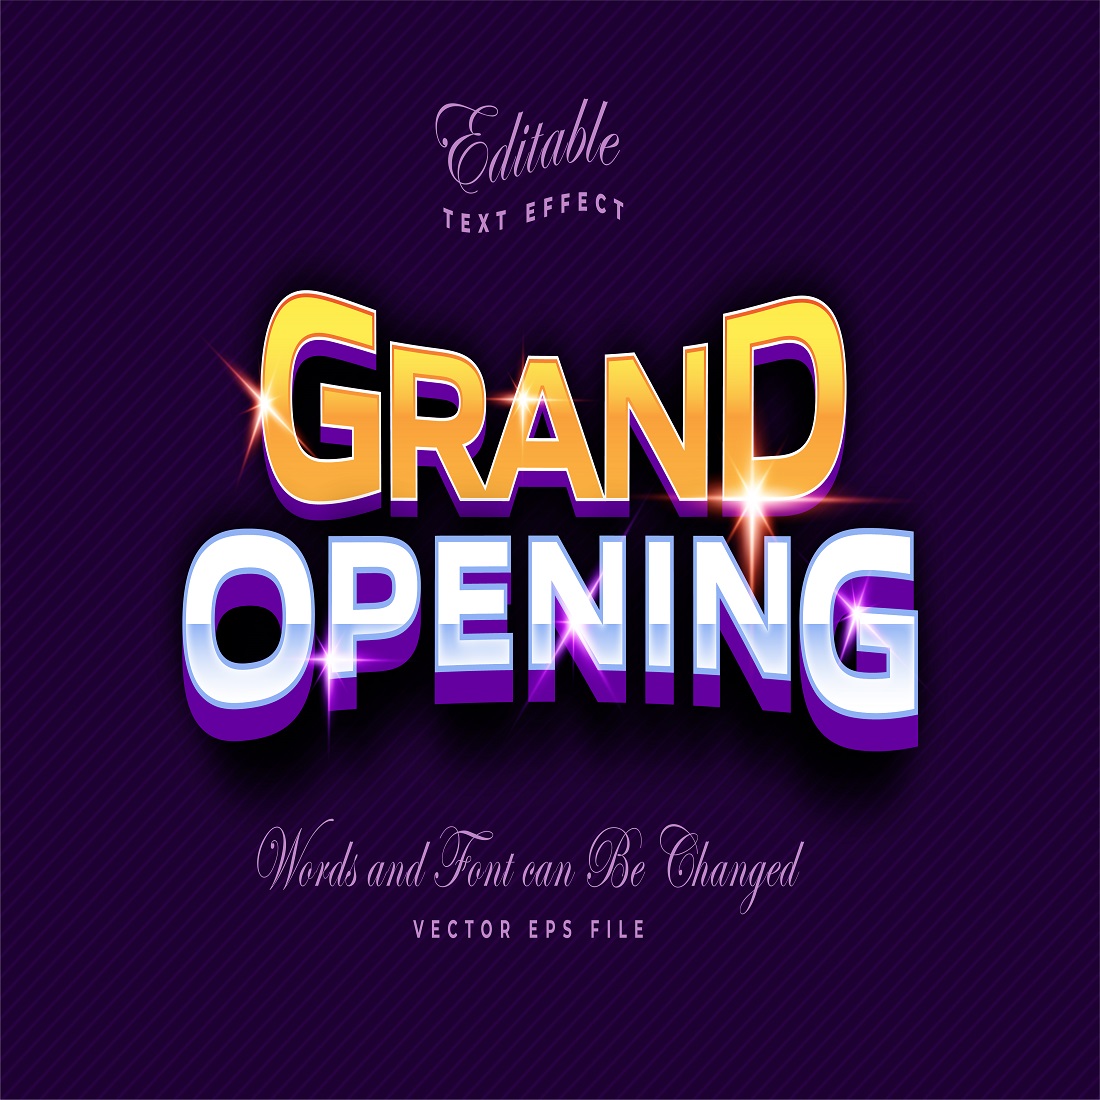 Grand opening text effect preview image.